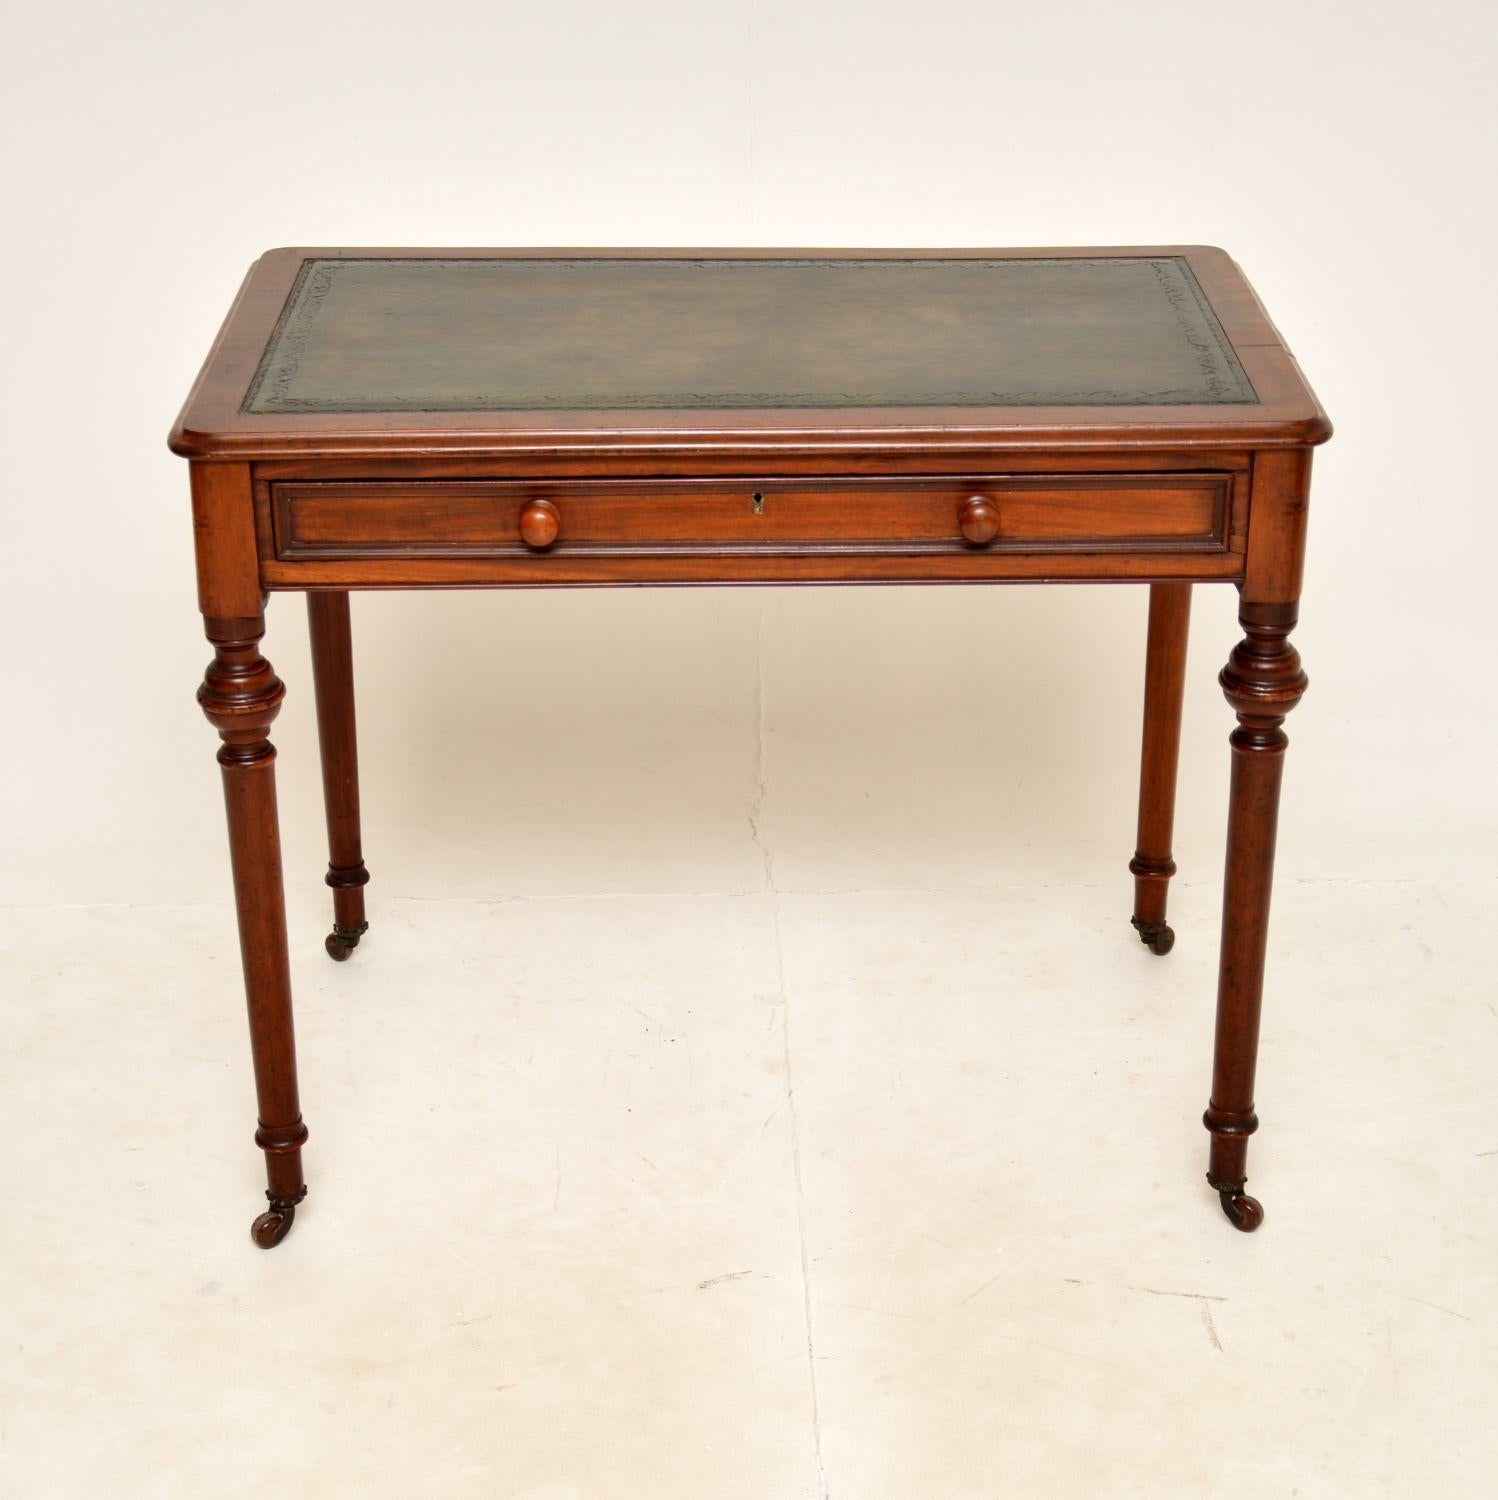 A smart and very well made antique Victorian period writing desk. This was made in England, it dates from around 1860-1880.

It is of great quality and is a very useful size. The inset leather to is hand coloured and gold tooled, there is a single